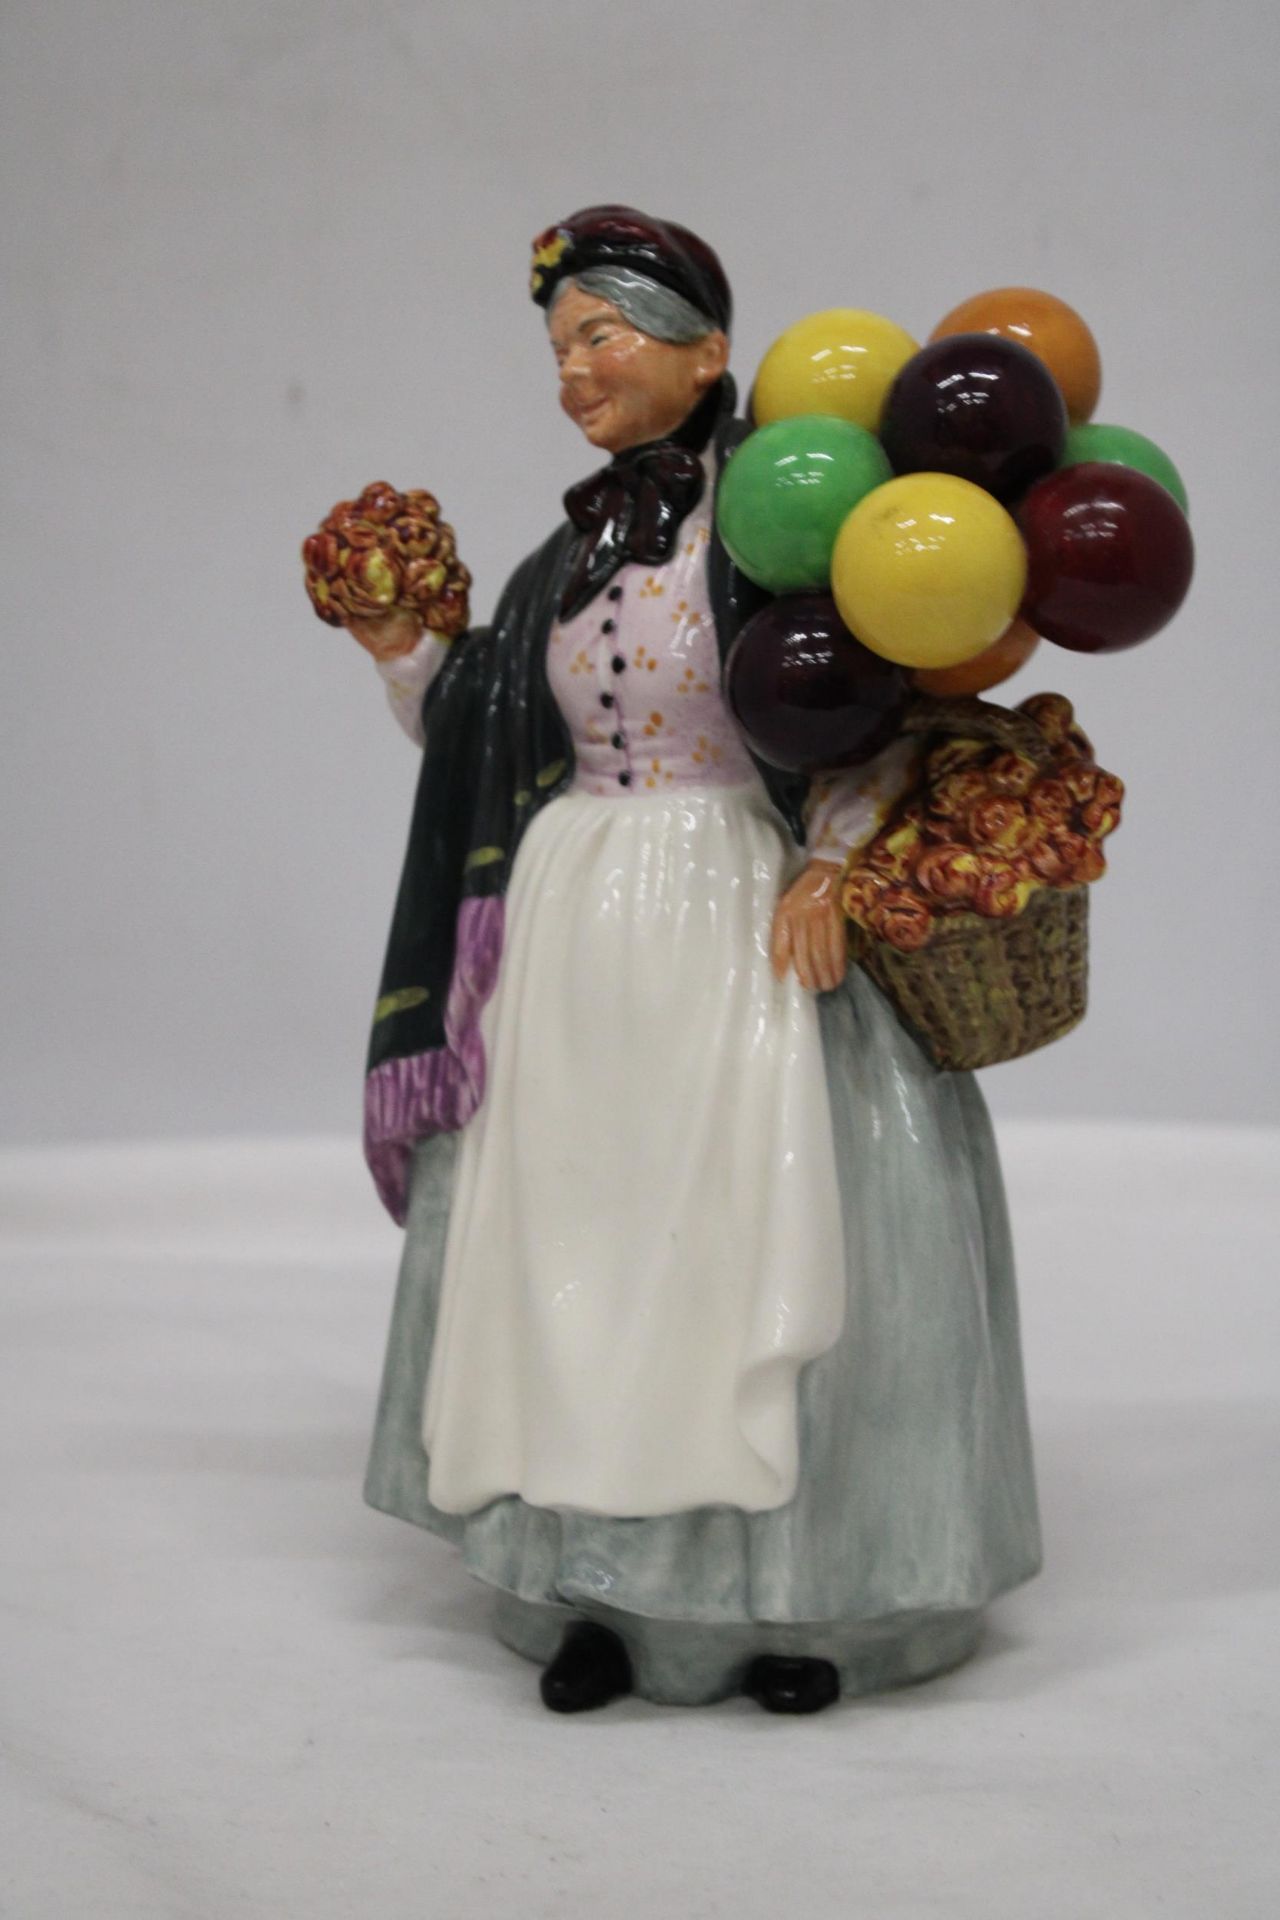 A ROYAL DOULTON FIGURE " BIDDY PENNY FARTHING" HN 1843 - Image 2 of 6